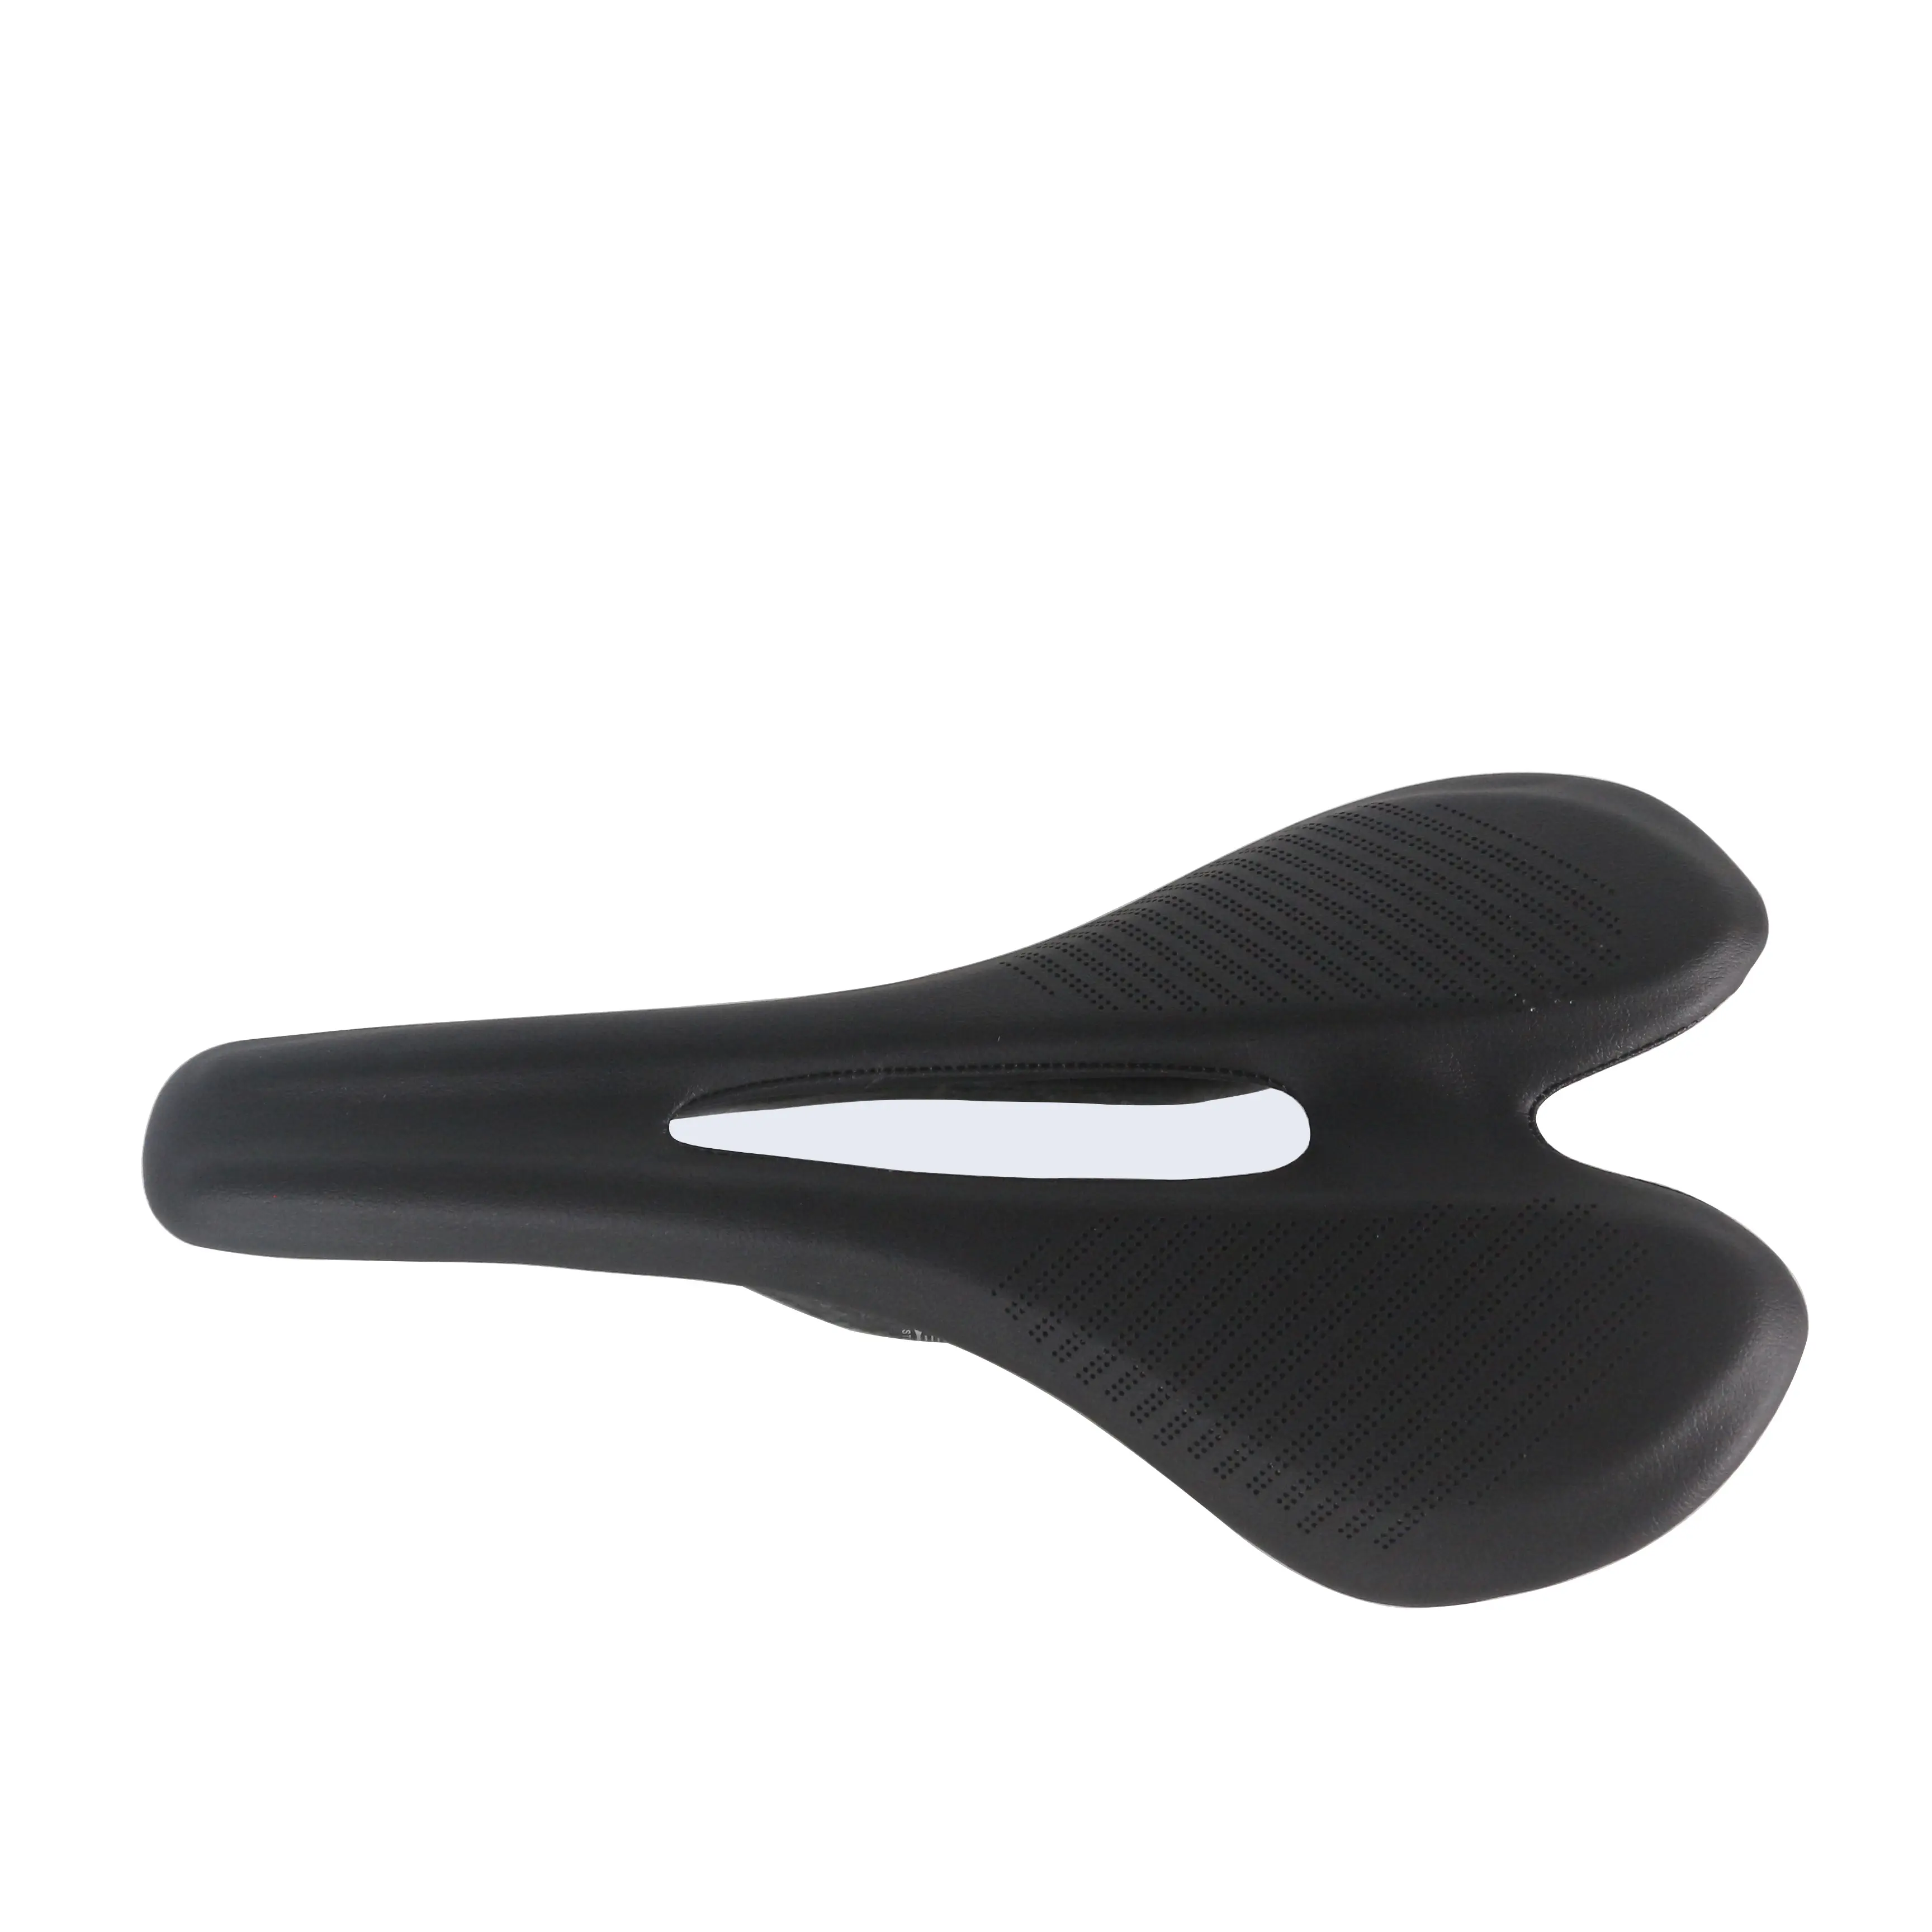 Full carbon fiber + Leather saddle suitable road mountain bicycle front seat saddle SD013